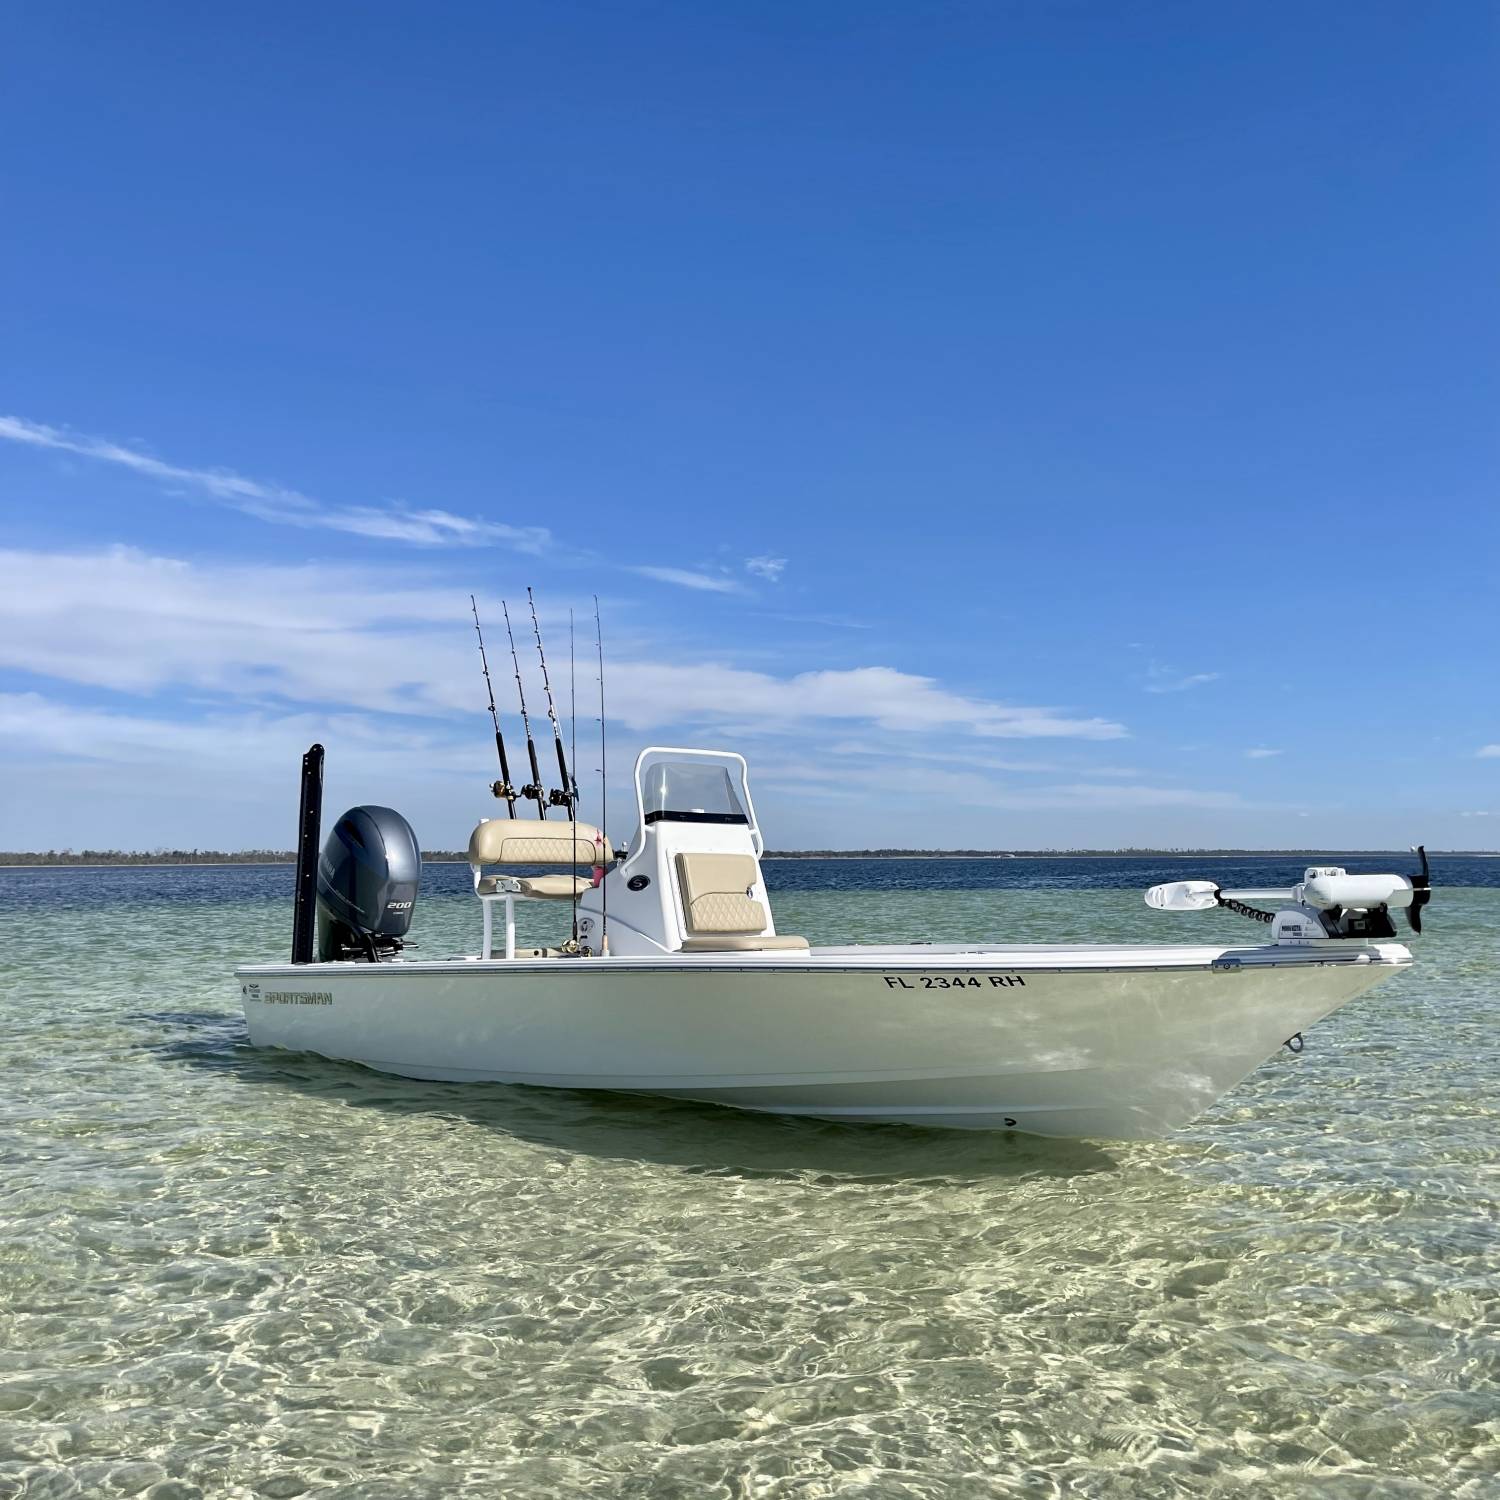 Title: Florida - On board their Sportsman Tournament 214 Bay Boat - Location: Panama City Beach, FL. Participating in the Photo Contest #SportsmanMarch